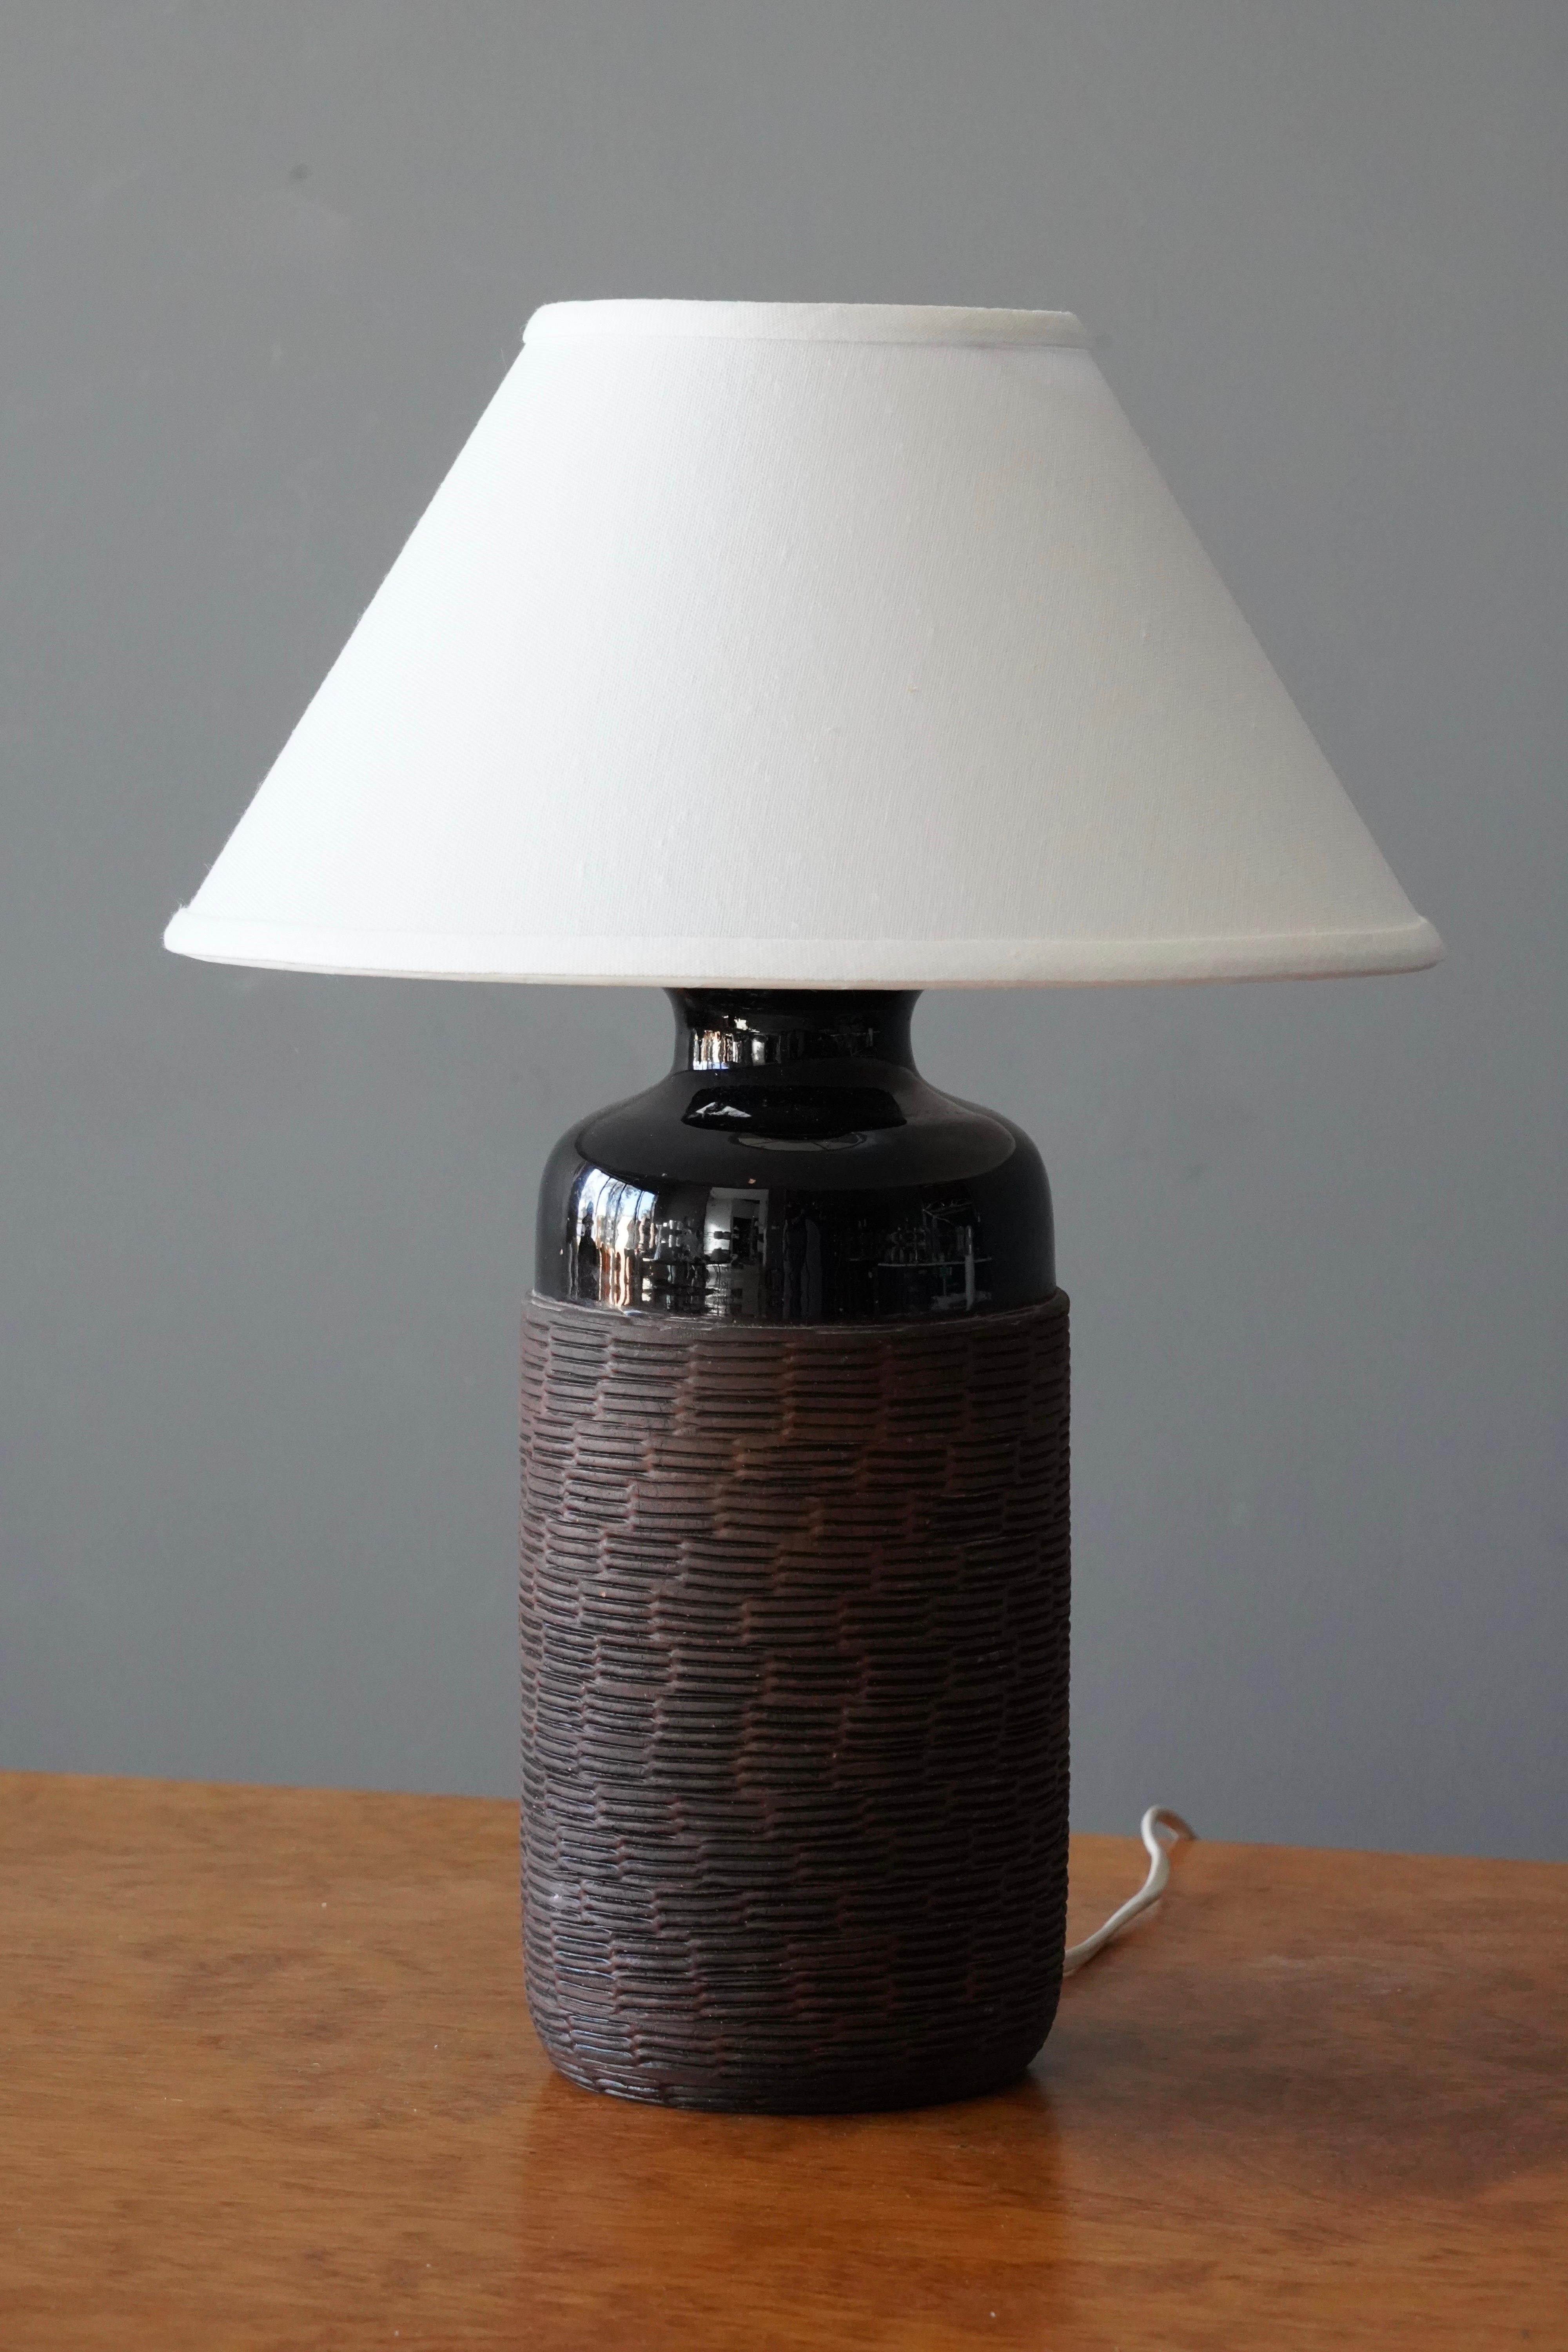 A table lamp, designed and produced in Sweden, c. 1960s. Likely studio production. Features high gloss black glaze and unglazed brown stoneware with simple incised decoration.

Dimensions listed are without shade. 
Dimensions with shade: Height